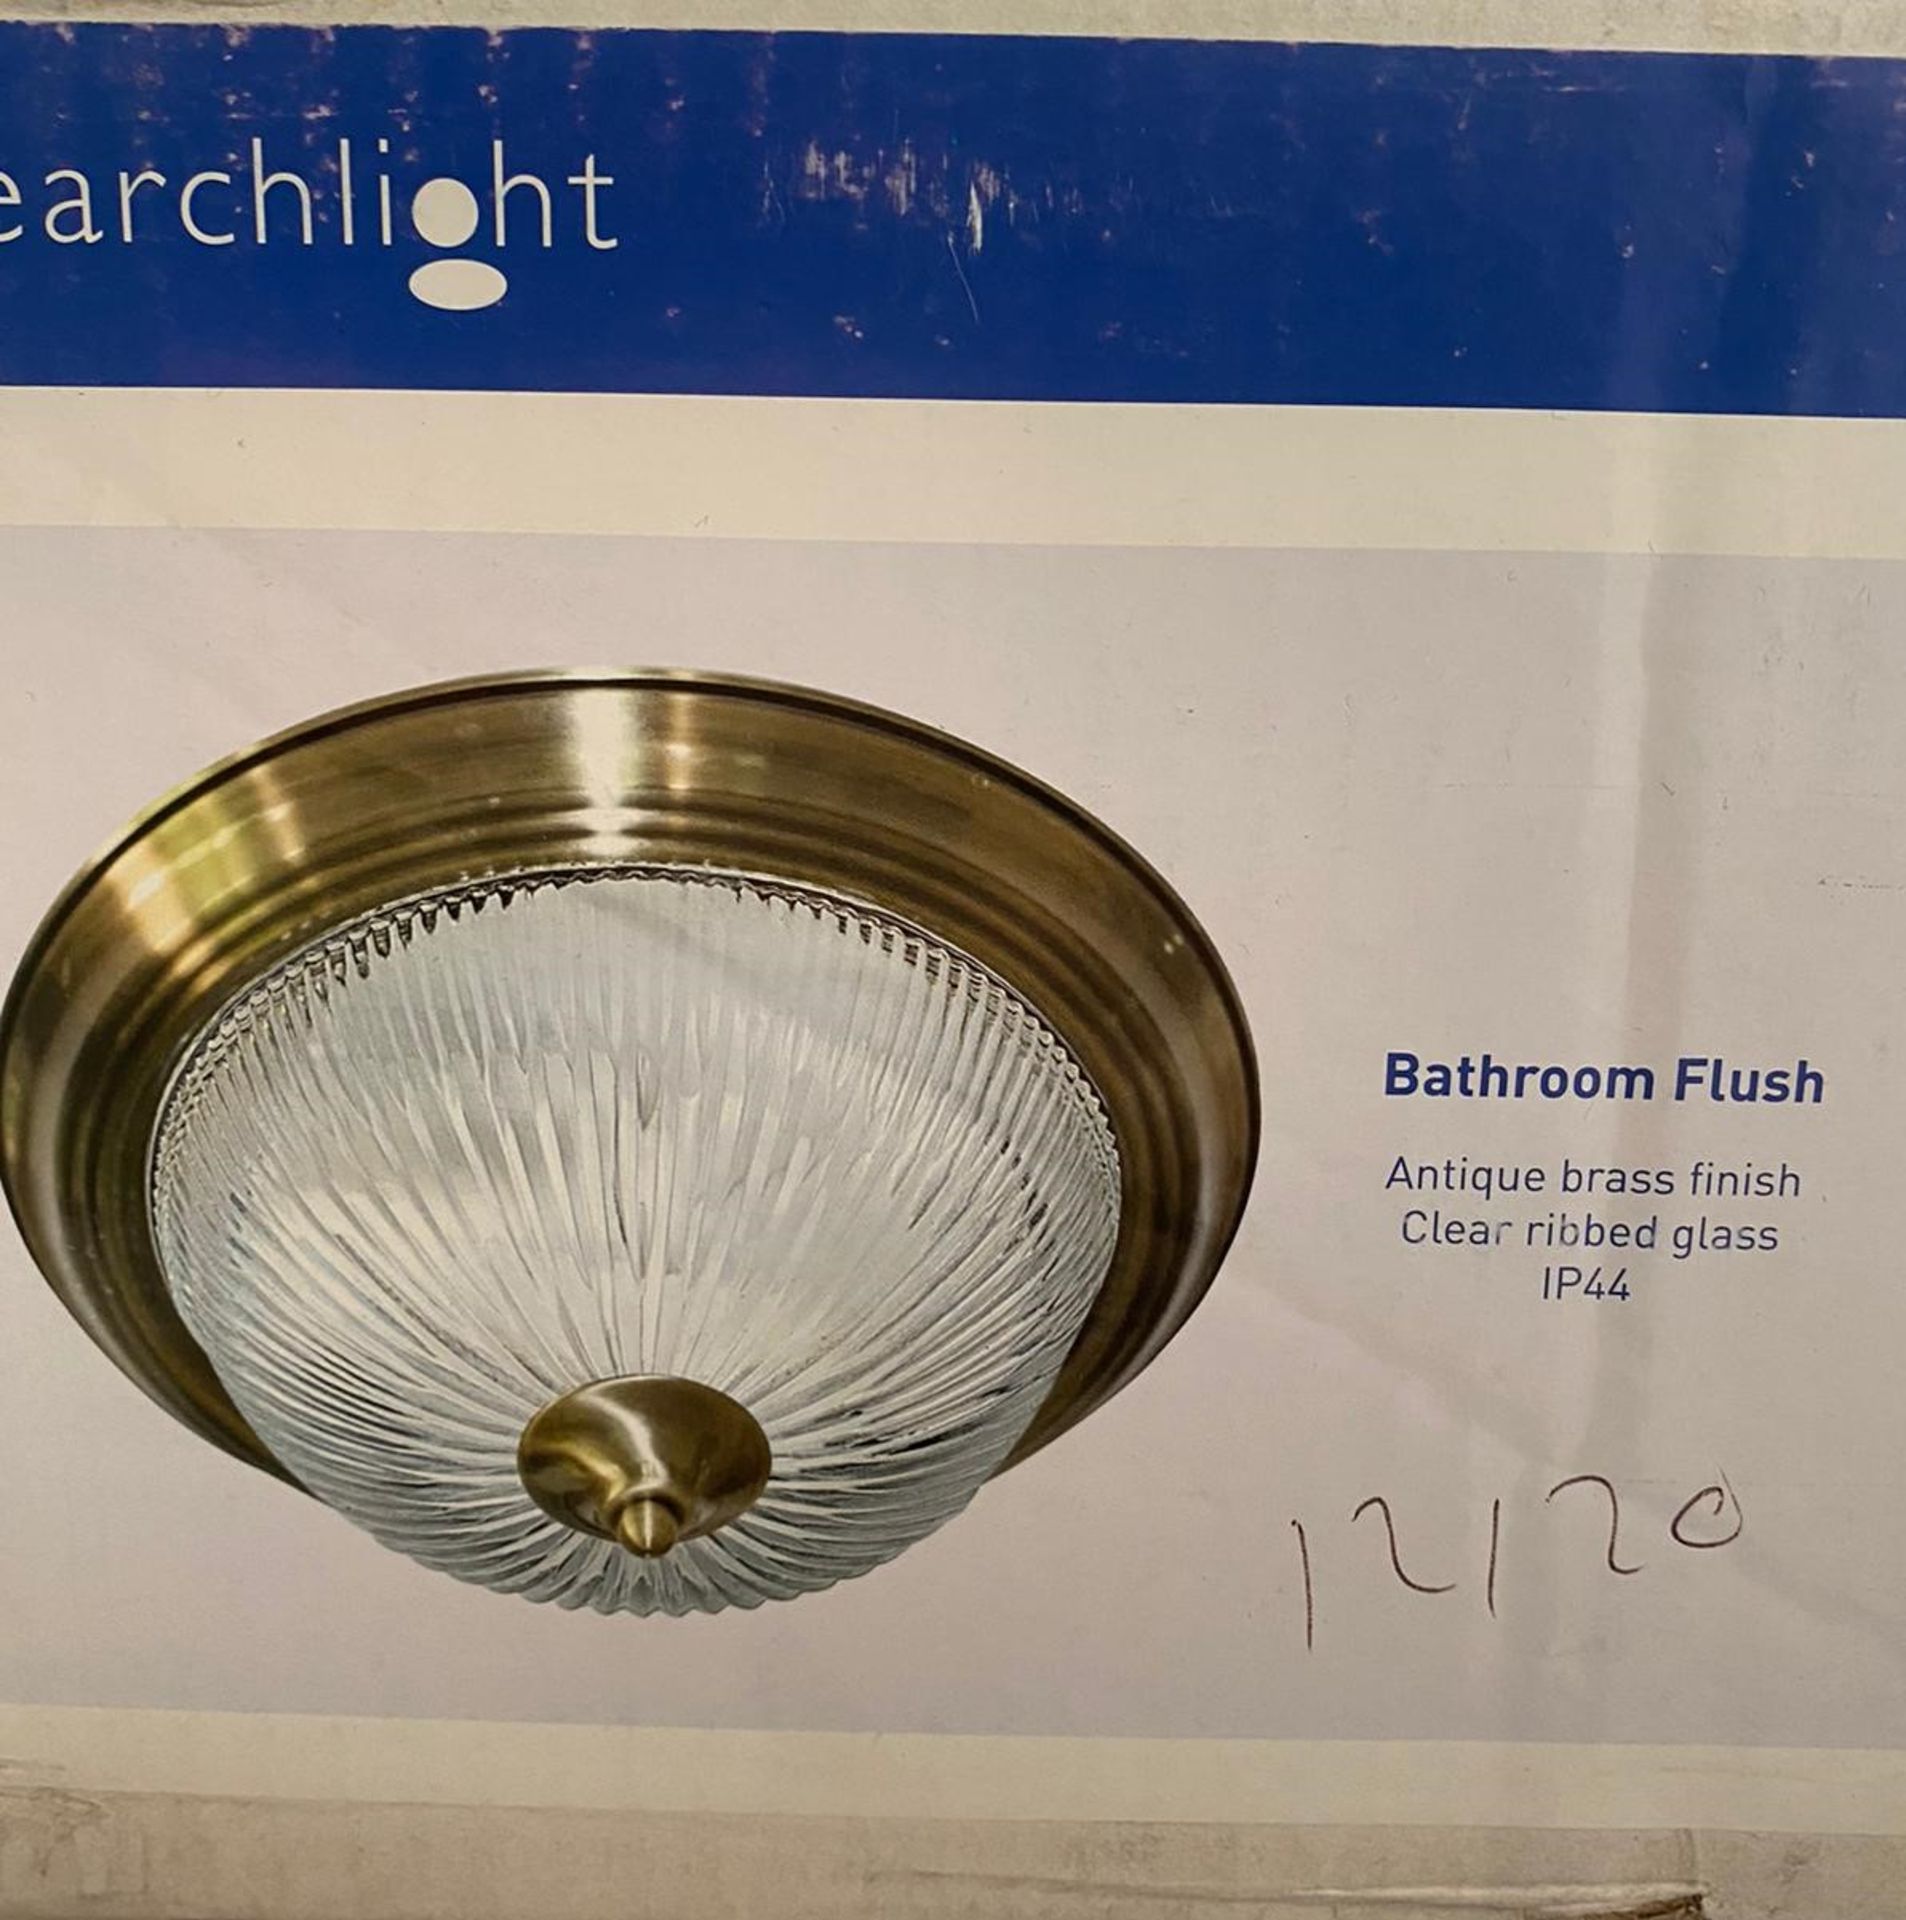 1 x Searchlight Bathroom Flush in Antique Brass - Ref: 4370 - New and Boxed stock - RR: £50 - Image 3 of 4